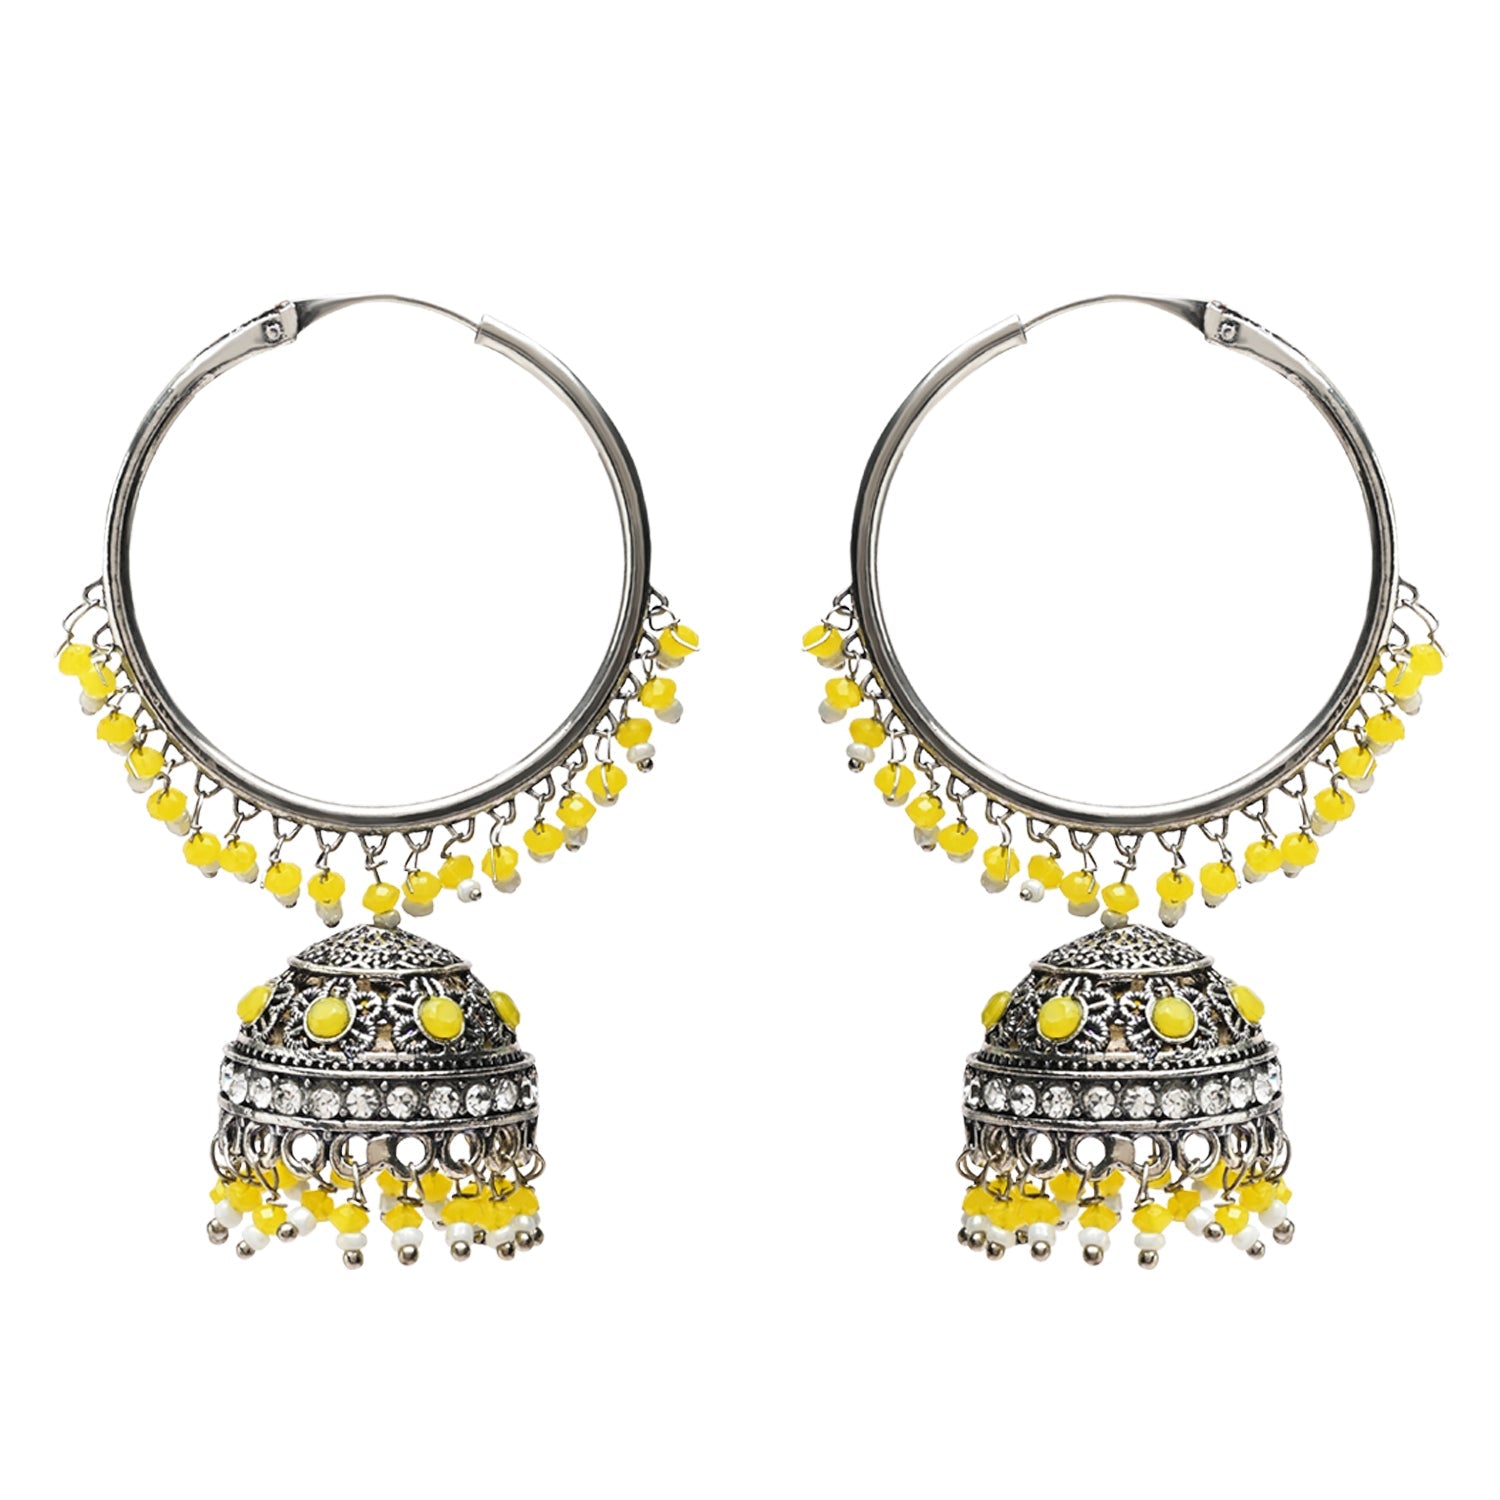 Women's Silver Plated Traditional Handcrafted Yelllow Pearl Jhumki Earrings (E3060Zy) - I Jewels